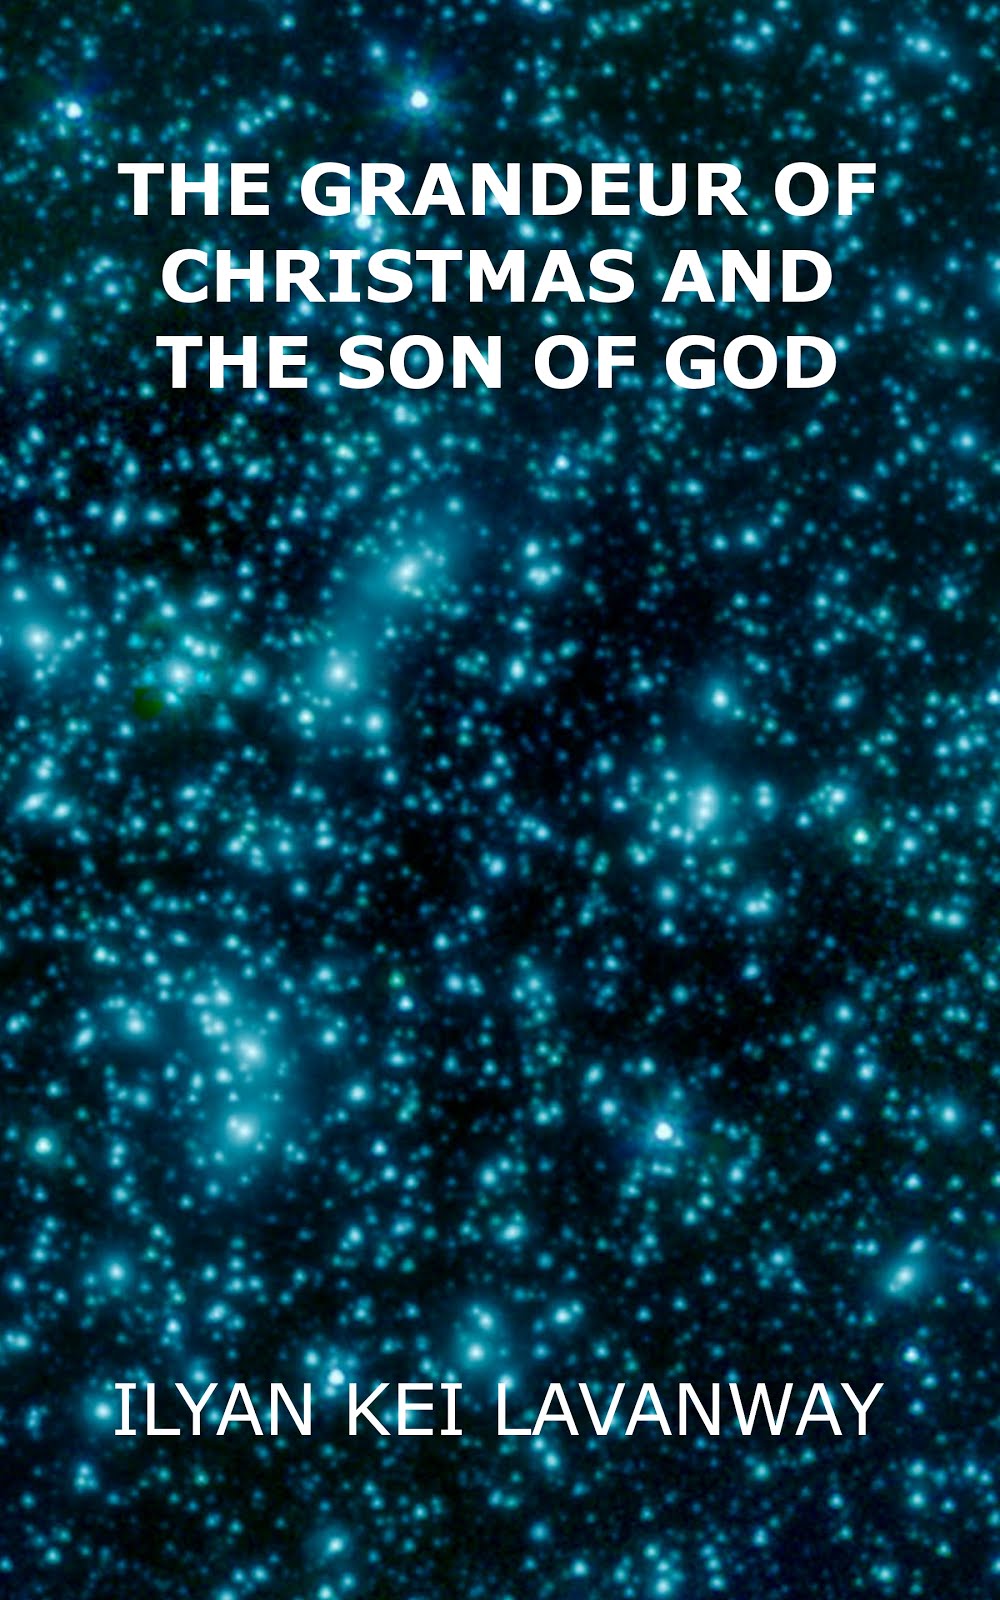 The Grandeur of Christmas and The Son of God, in print and Kindle at Amazon